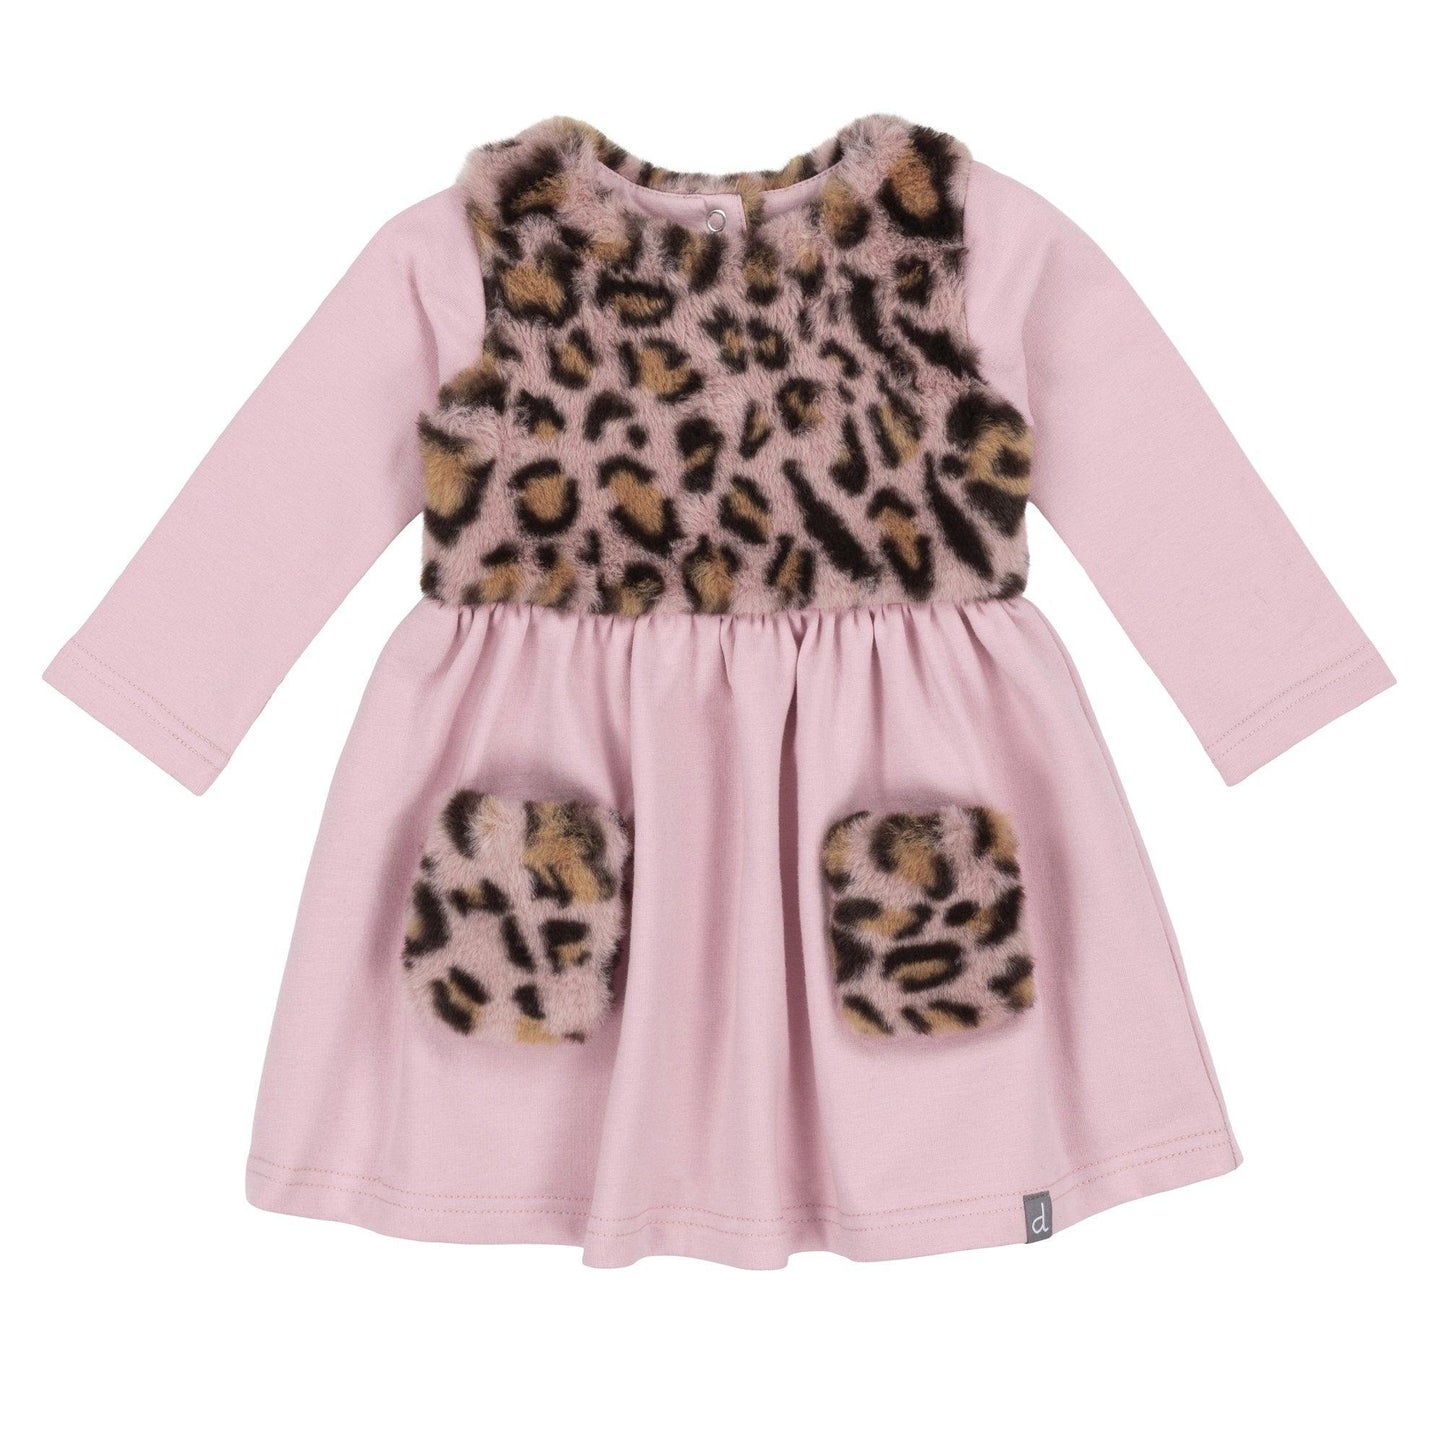 Pink Fleece Dress With Faux-Fur Insert  CatchMySwag 6m  